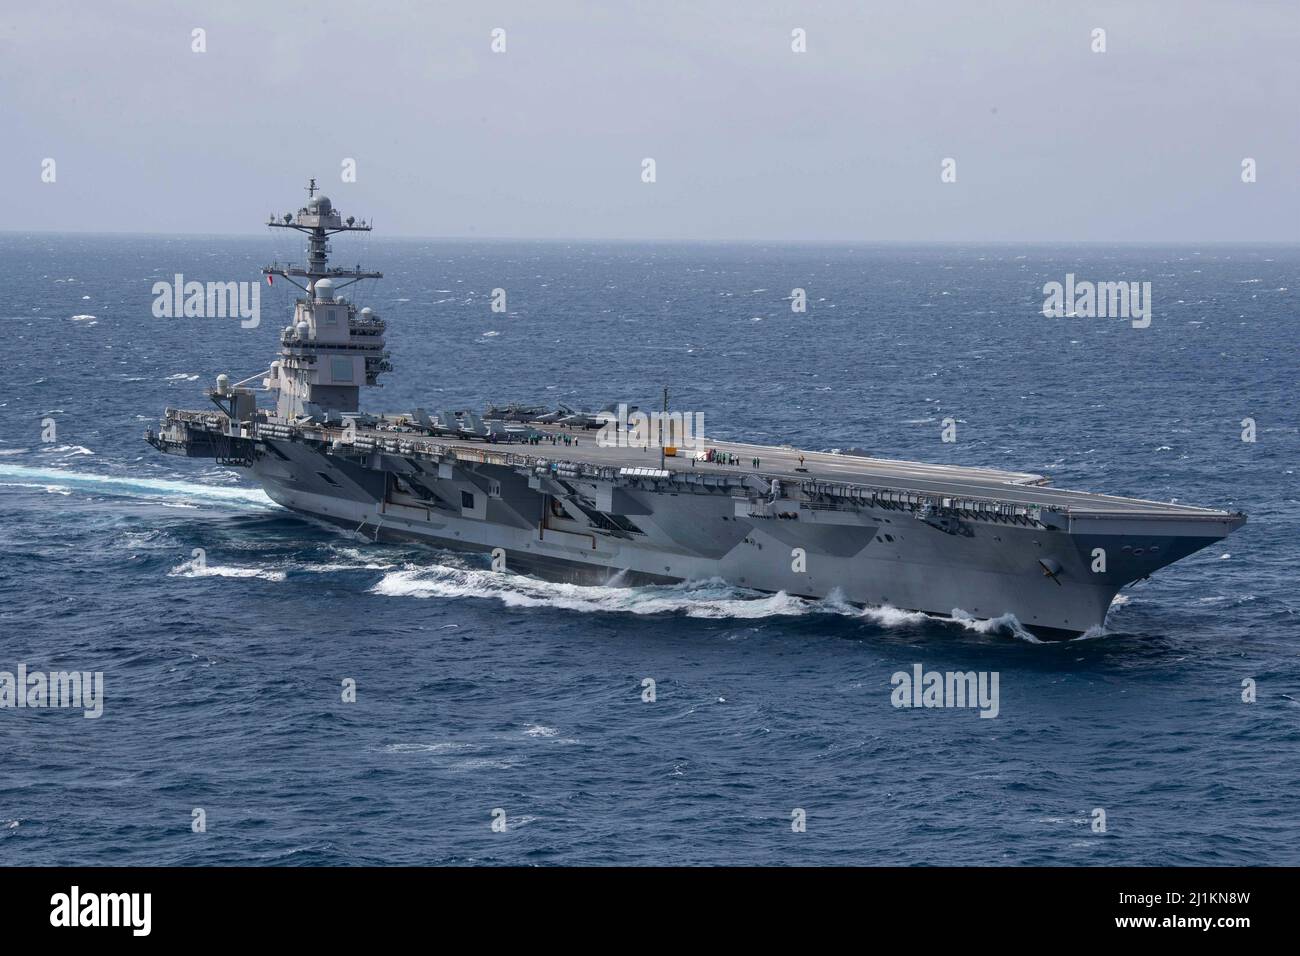 Atlantic Ocean, United States. 24 March, 2022. The U.S. Navy Ford-class aircraft carrier USS Gerald R. Ford underway during flight deck certification and air wing carrier qualifications, March 23, 2022 in the Atlantic Ocean.  Credit: MC3 Jackson Adkins/Planetpix/Alamy Live News Stock Photo